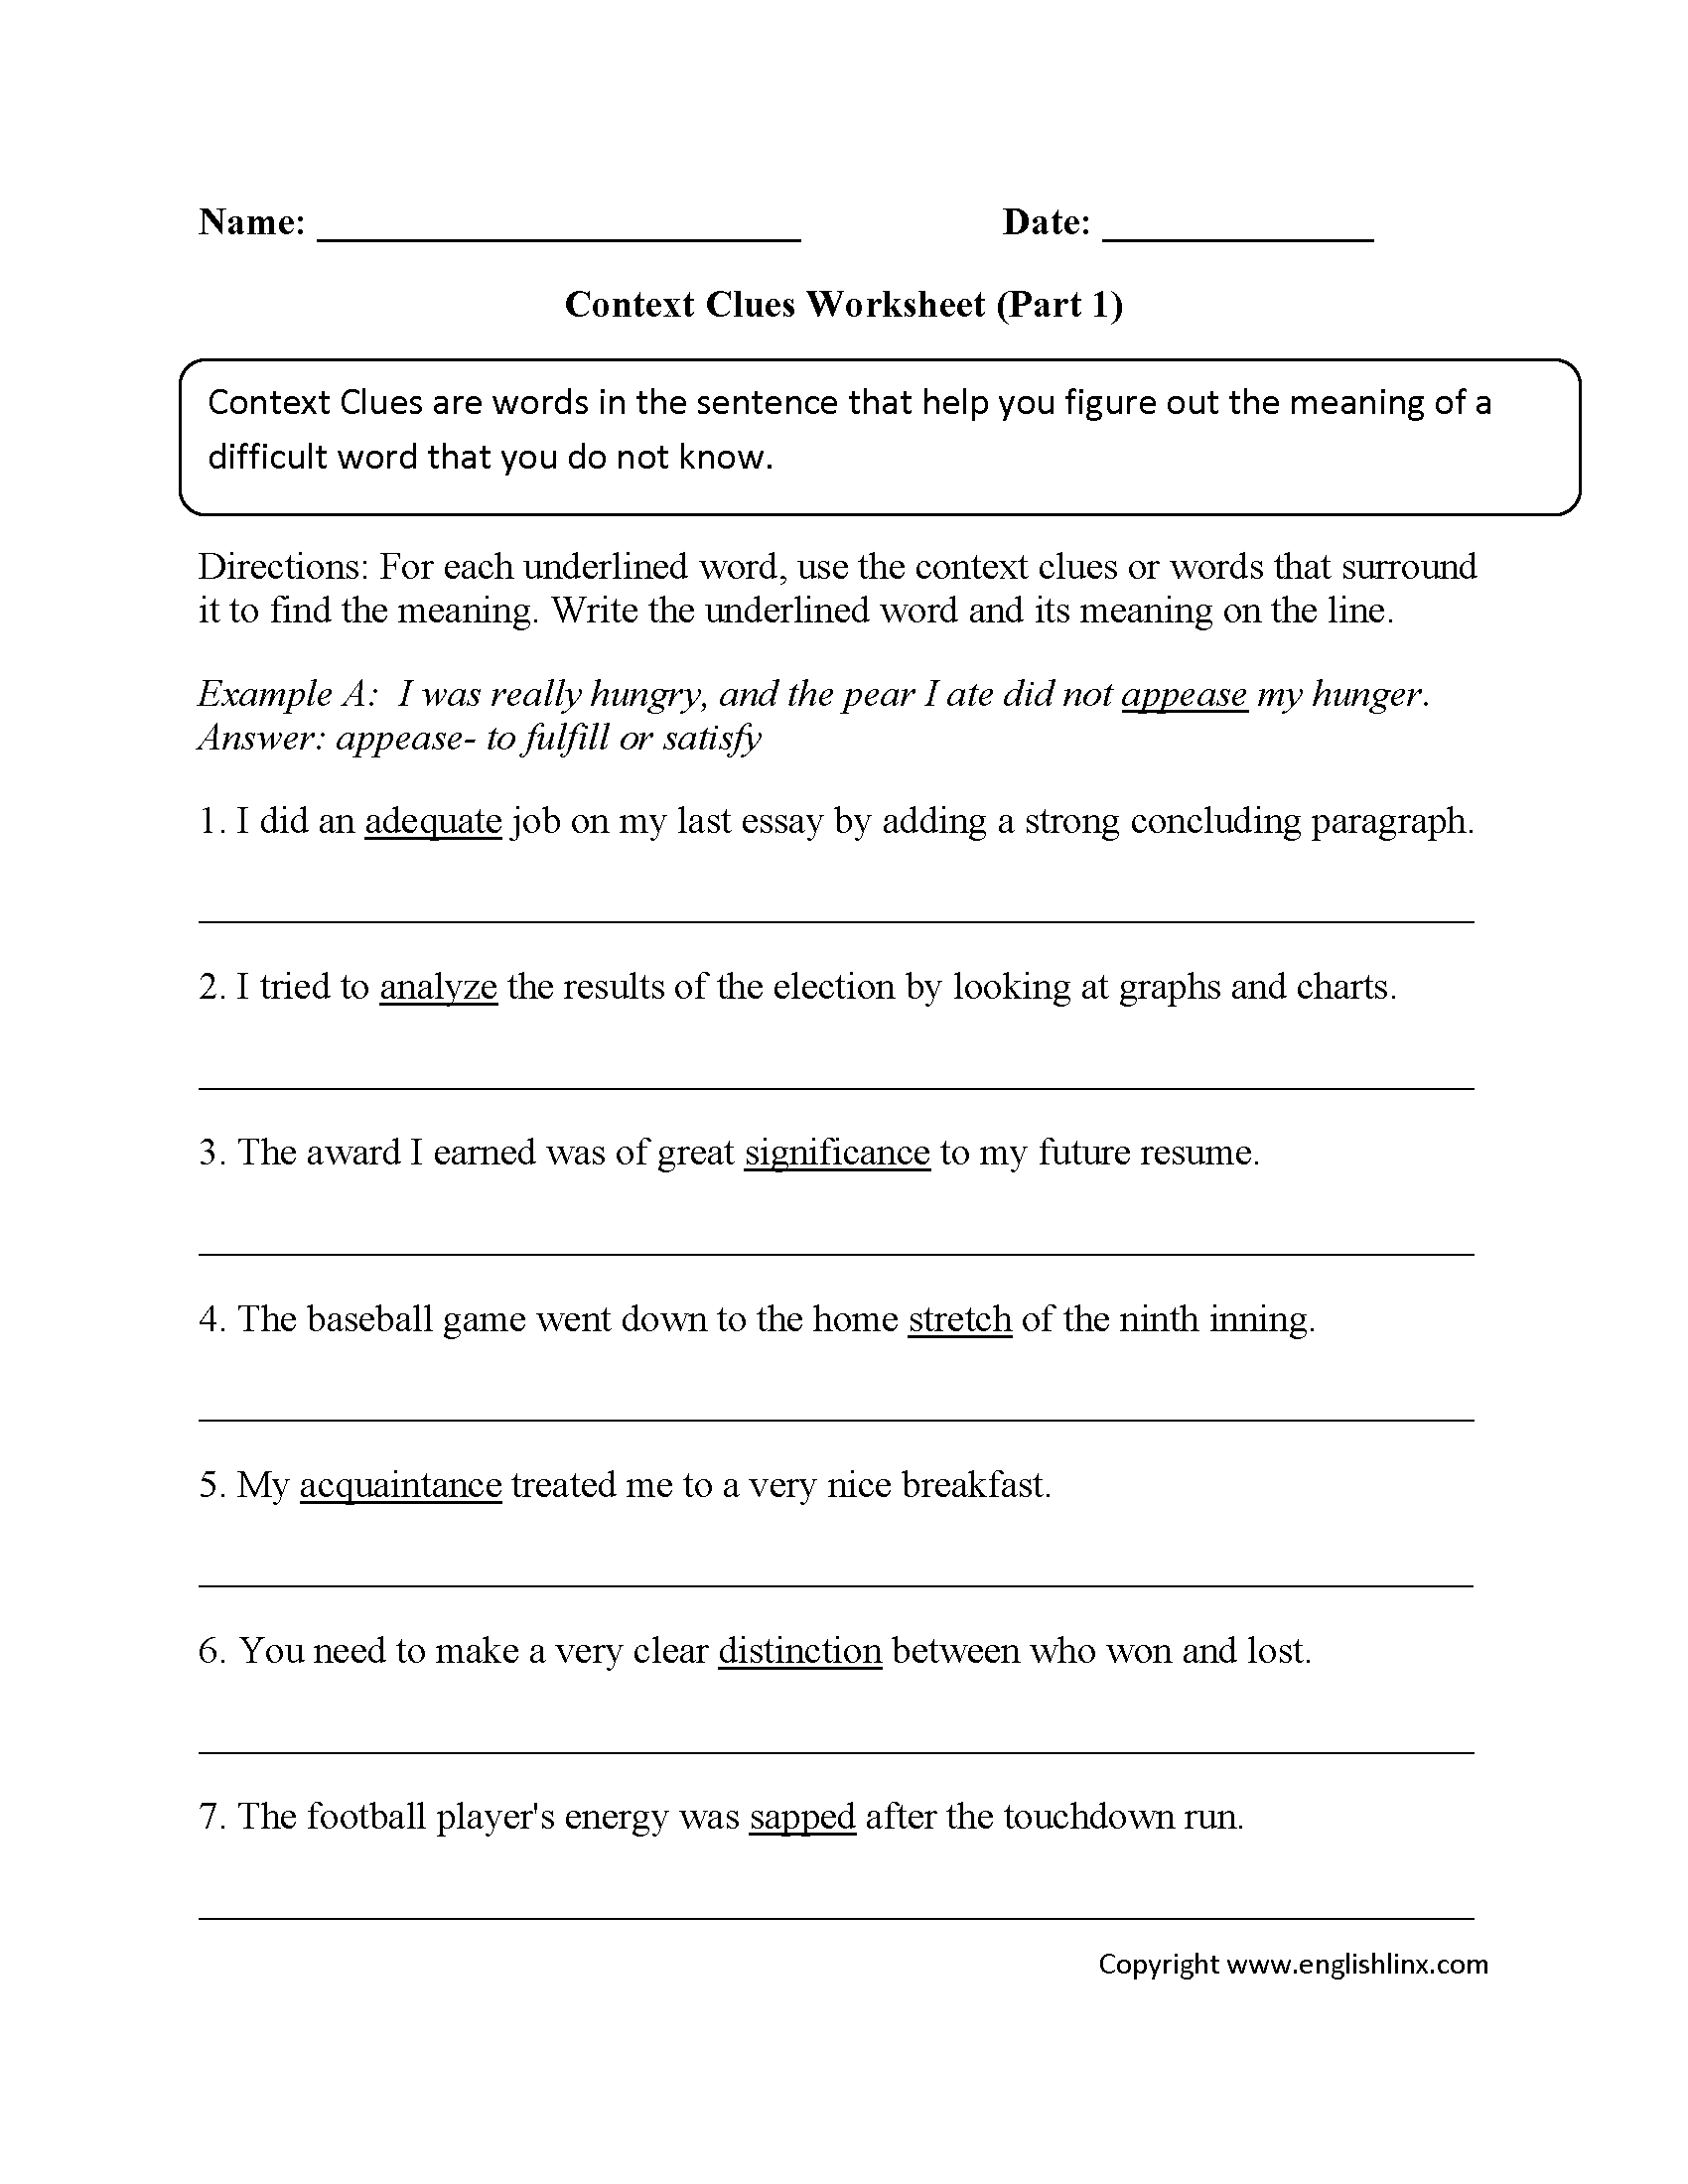 free-printable-context-clues-worksheets